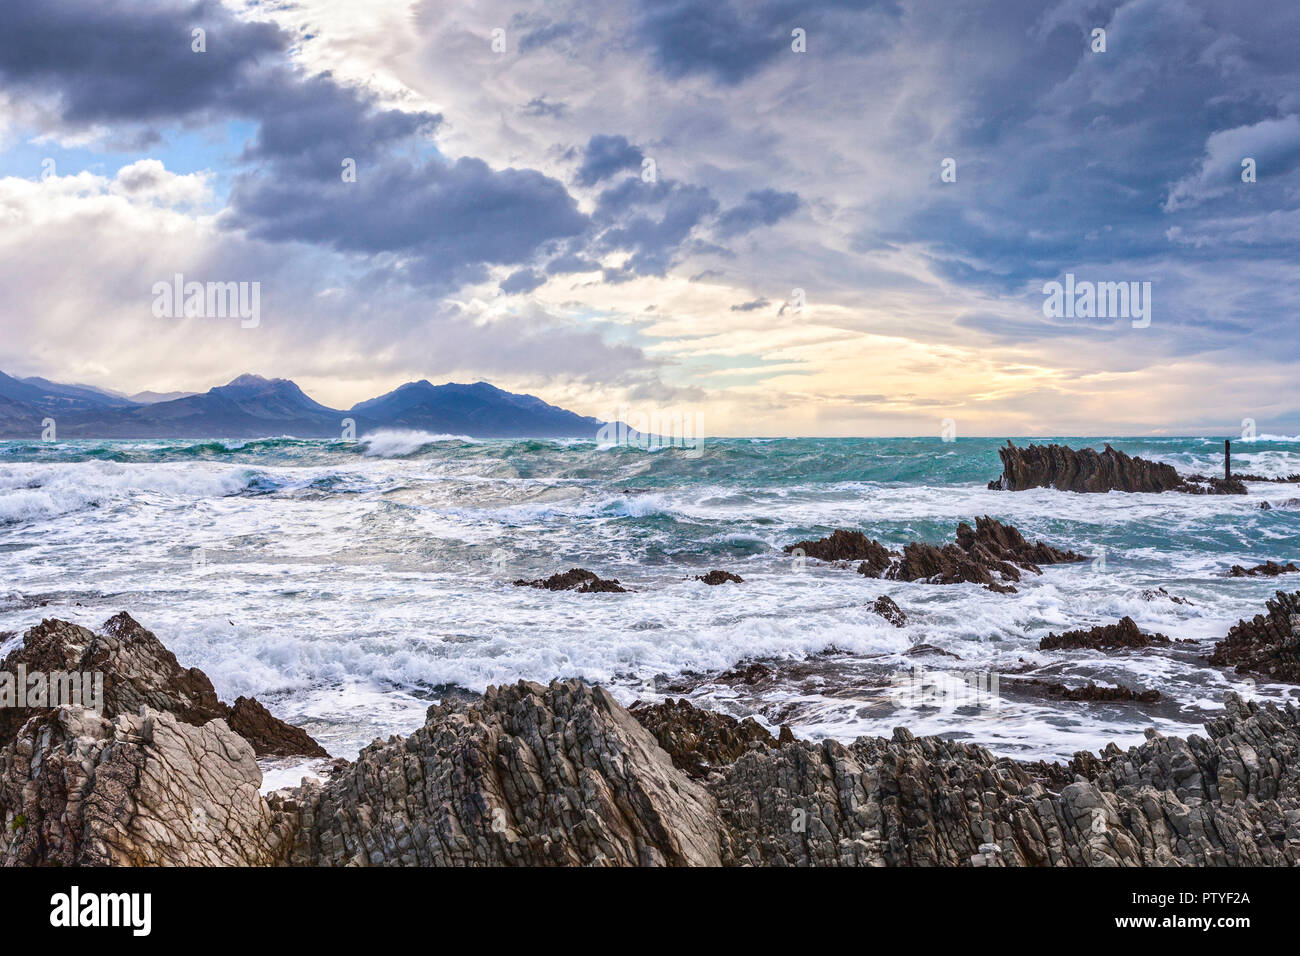 Wild weather at Kaikoura, New Zealand. The town is an important tourist destination, particularly for observing whales, dolphins and seals. Stock Photo